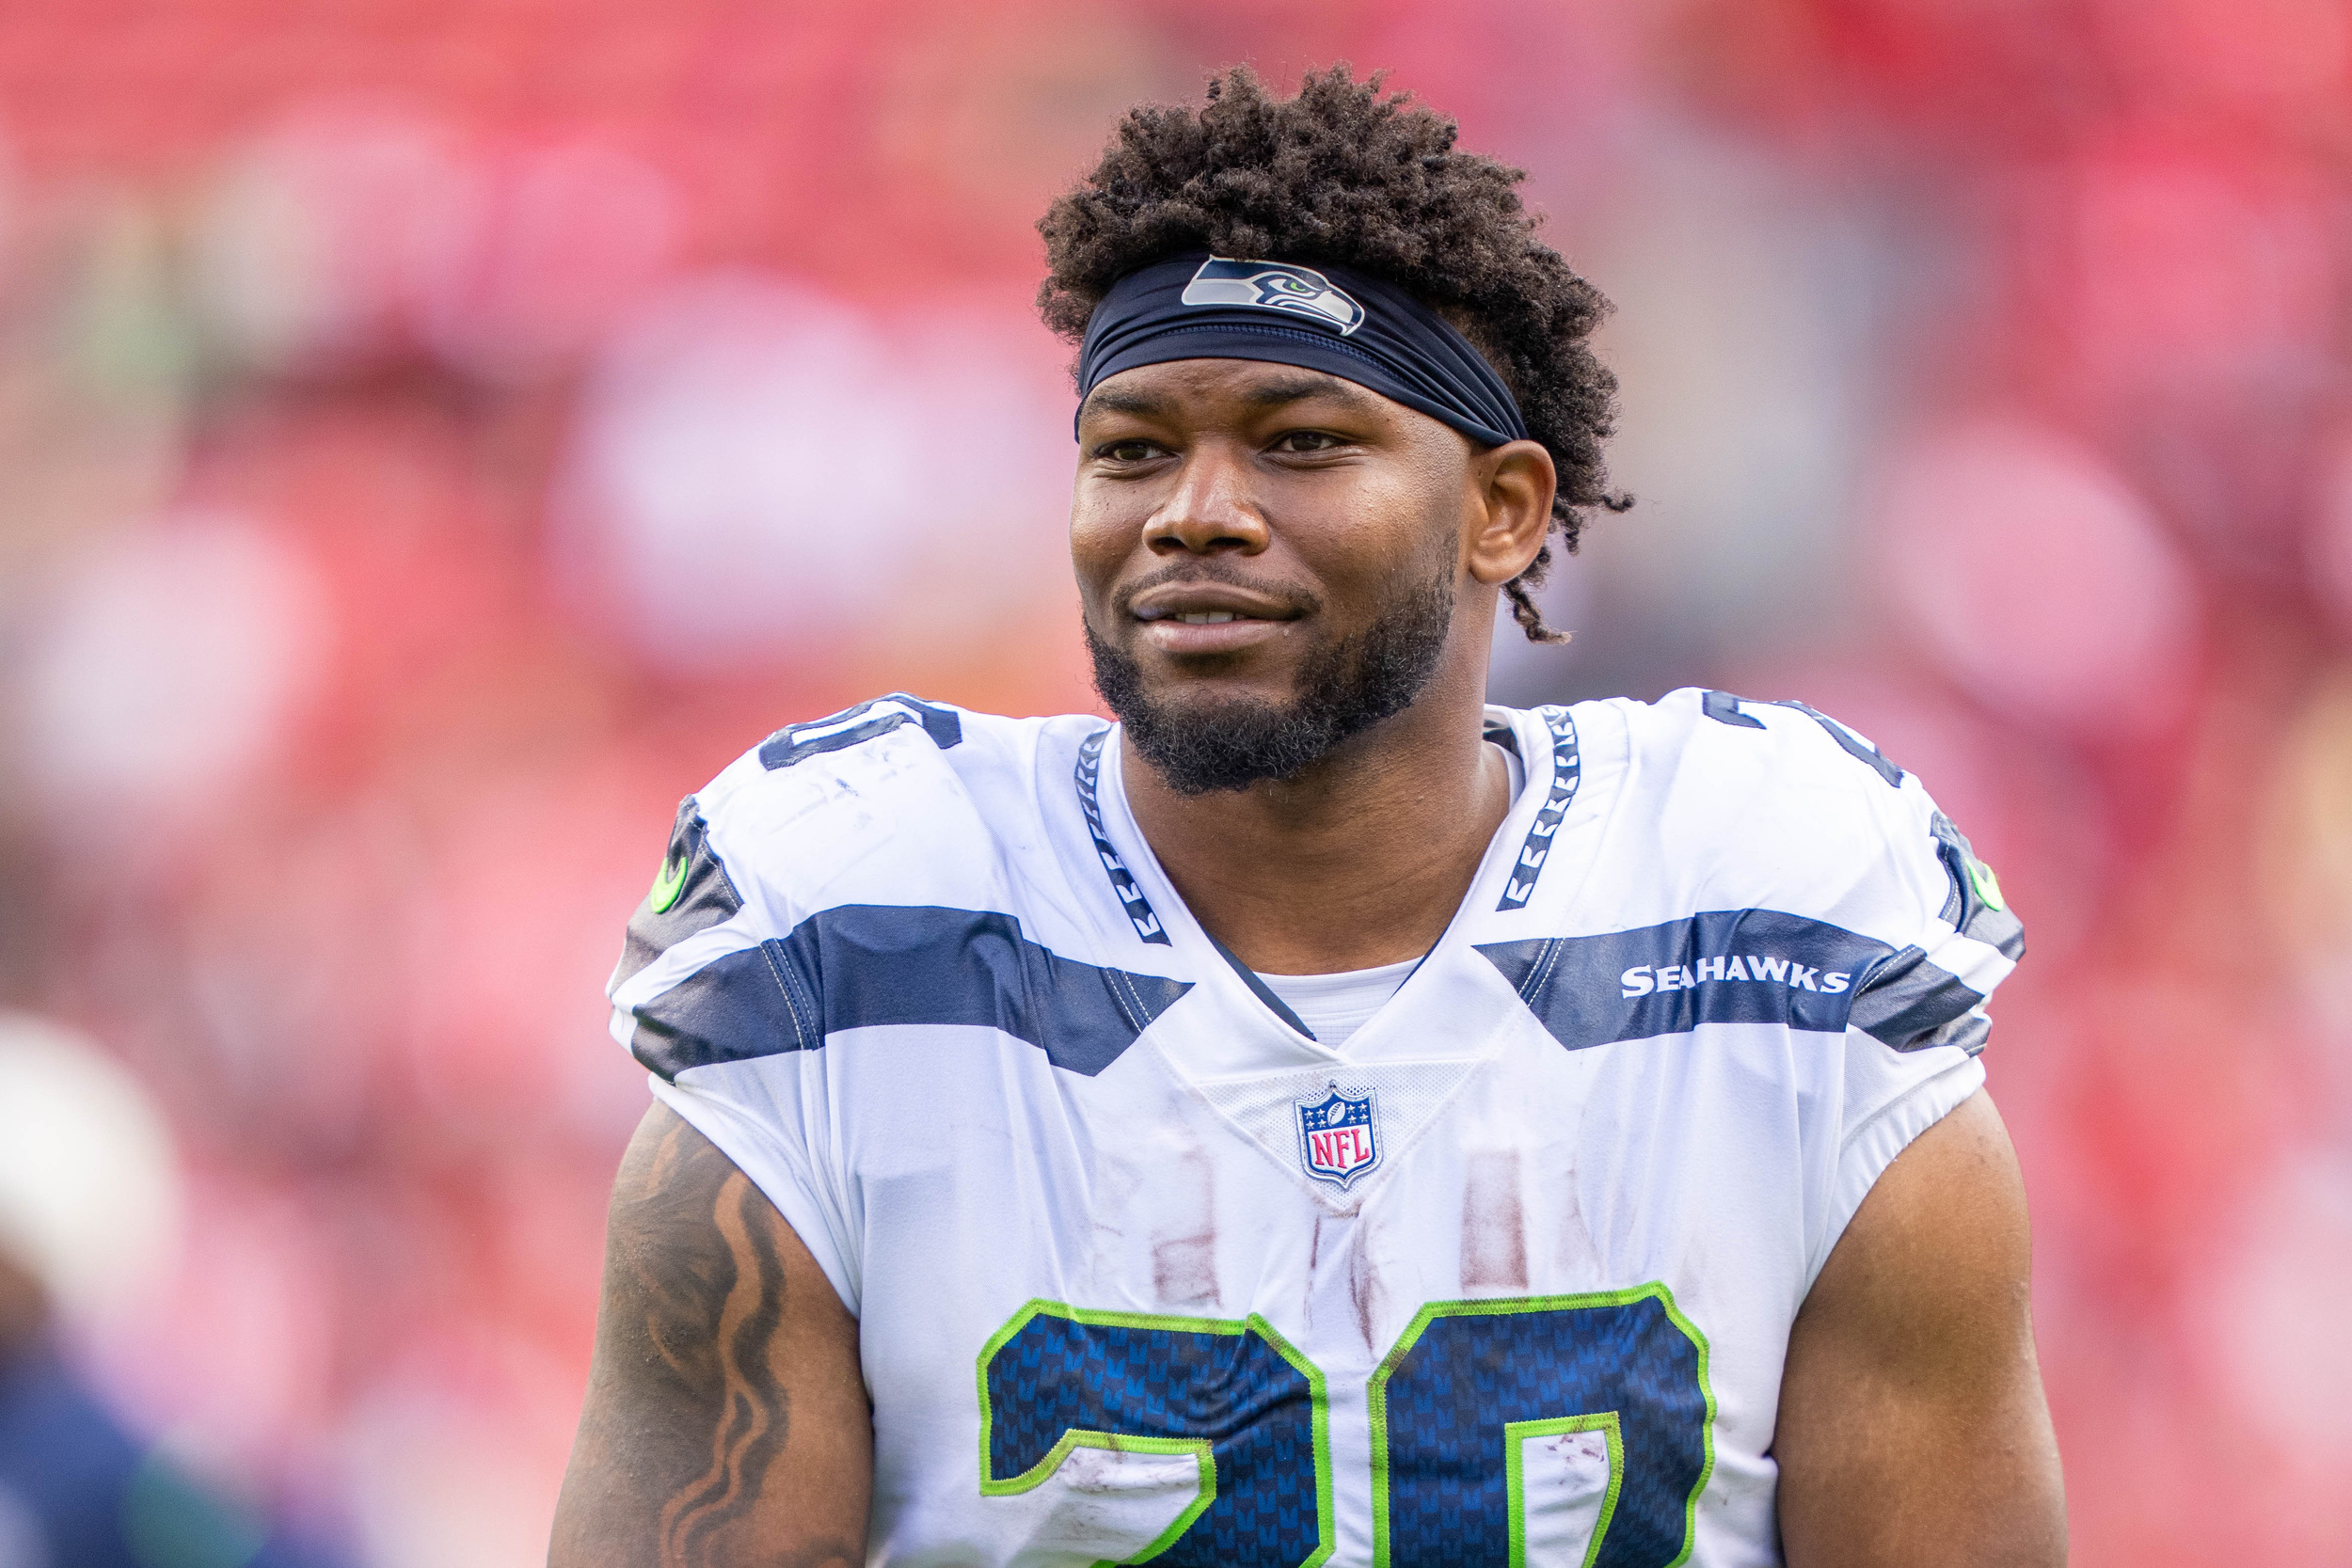 panthers signing ex-seahawks rushing leader to deal